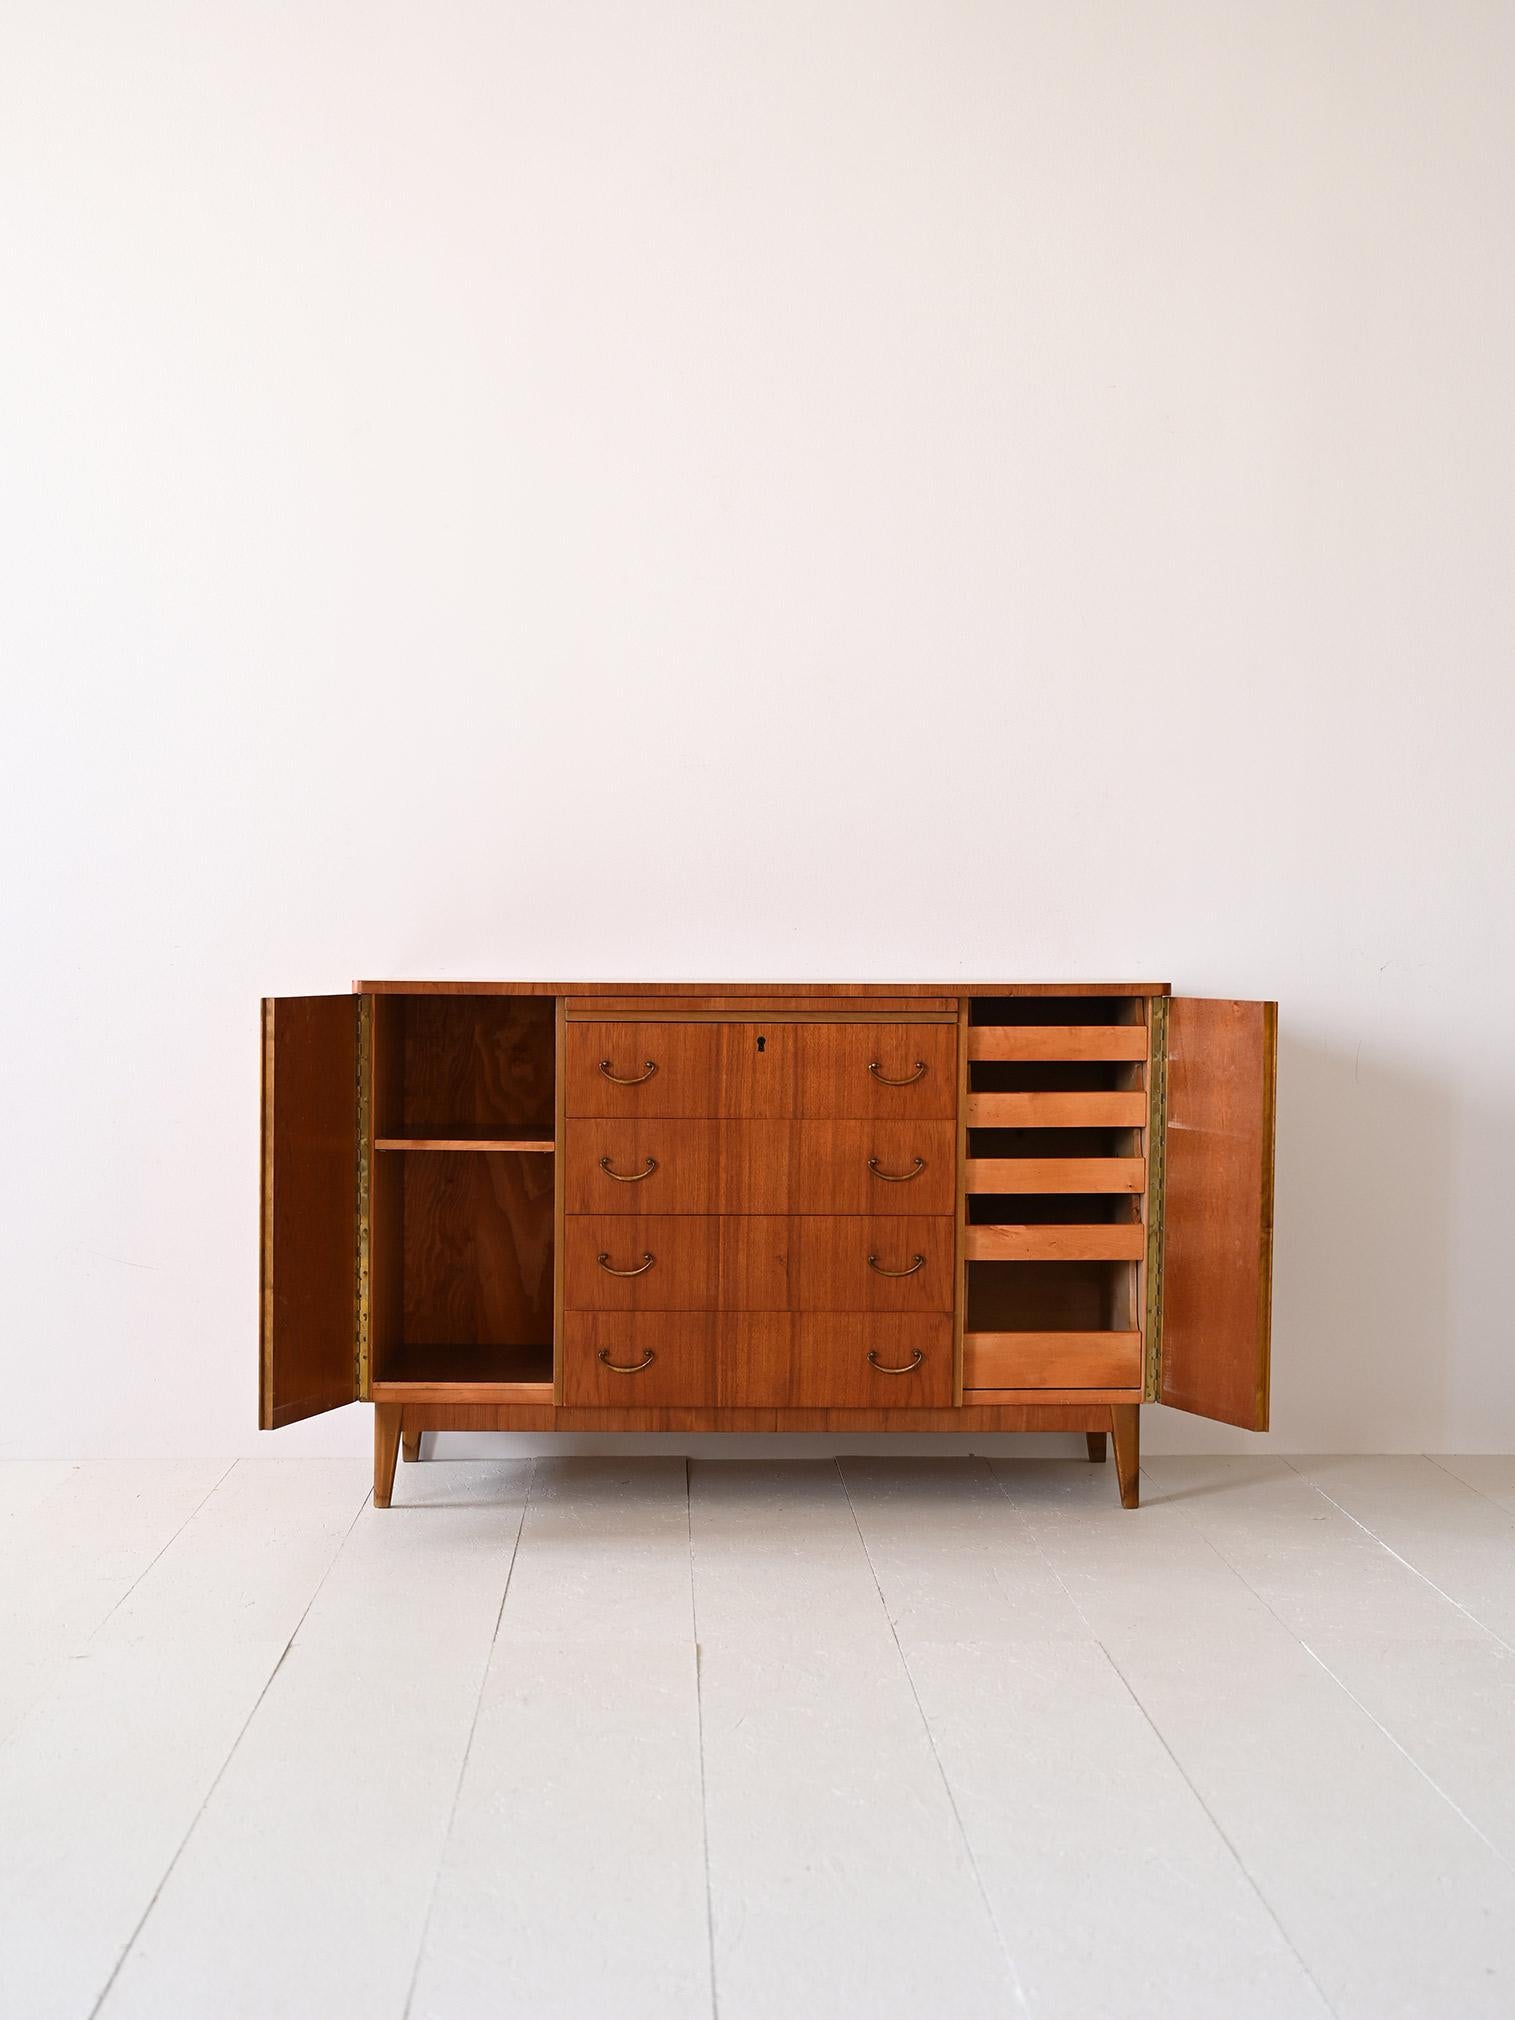 Scandinavian sideboard with central drawers.

This piece of furniture with a vintage flavor is characterized by the presence of the golden handles on the drawers and the division of space into three compartments. On the two sides there is